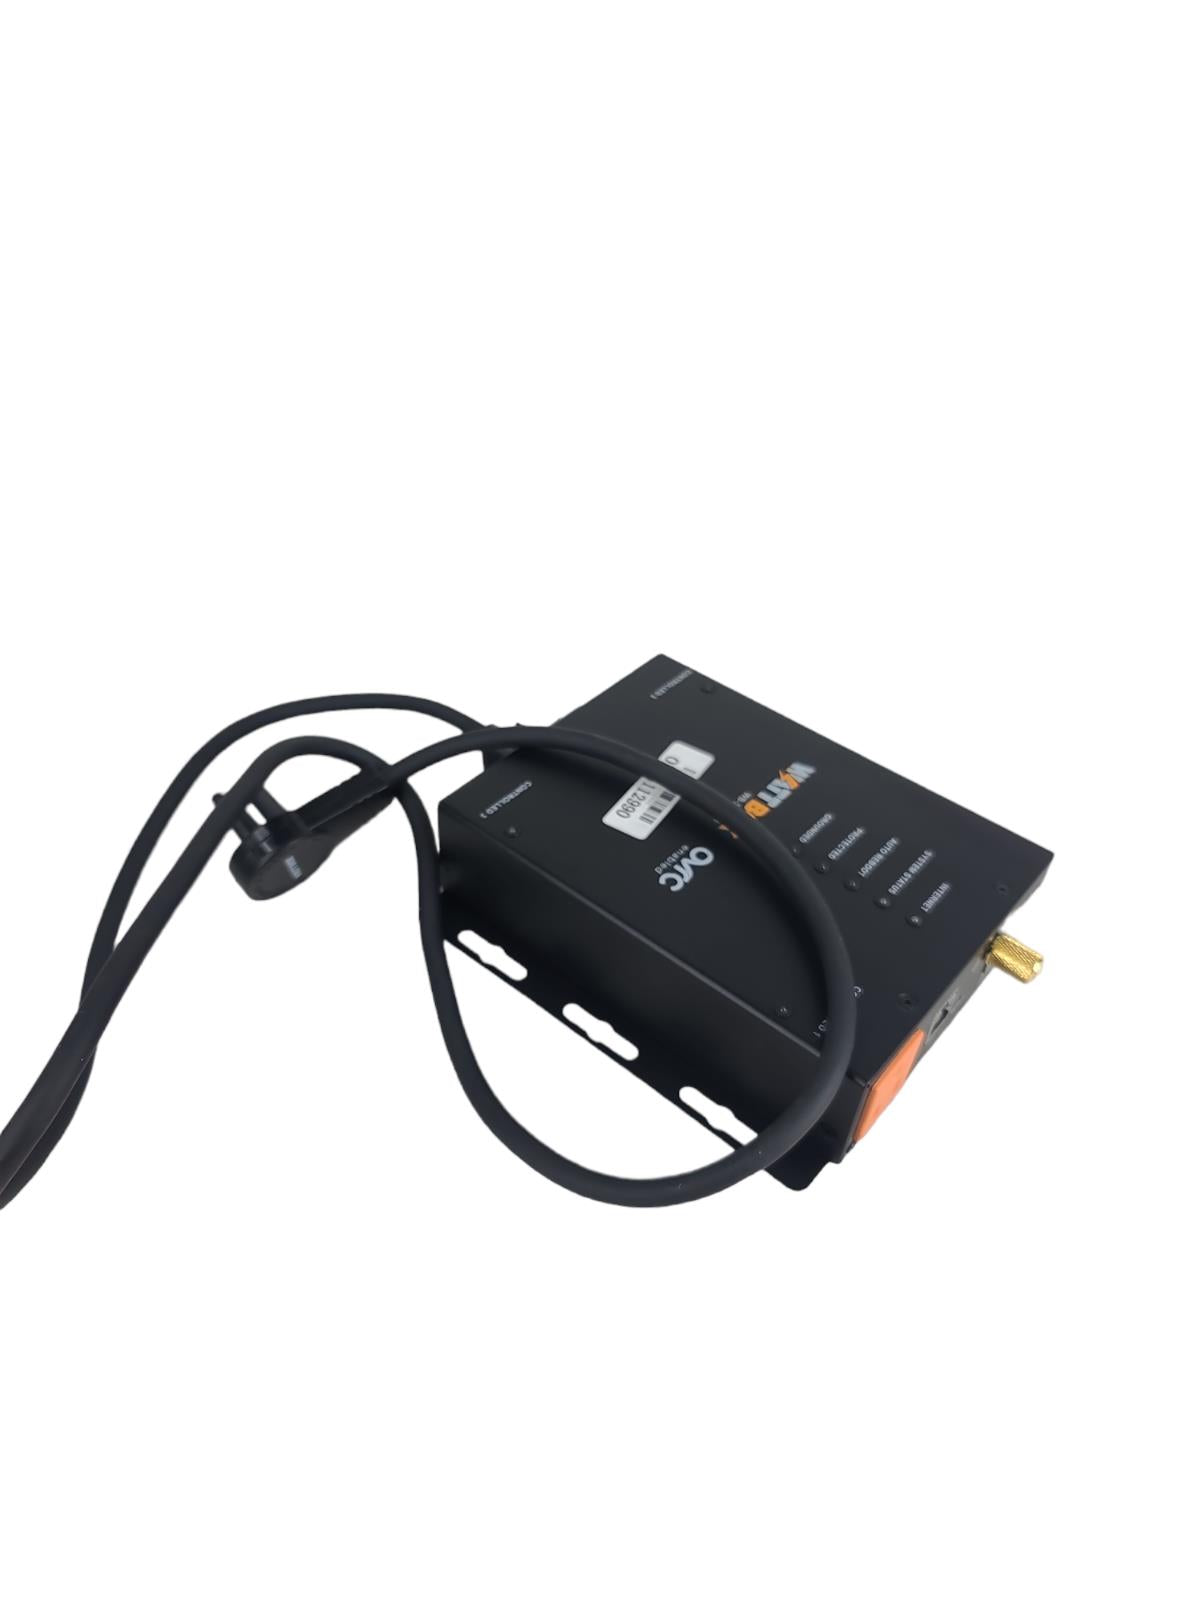 WB-300-IP-3 WATTBOX 3-OUTLET POWER SURGE CONDITIONER